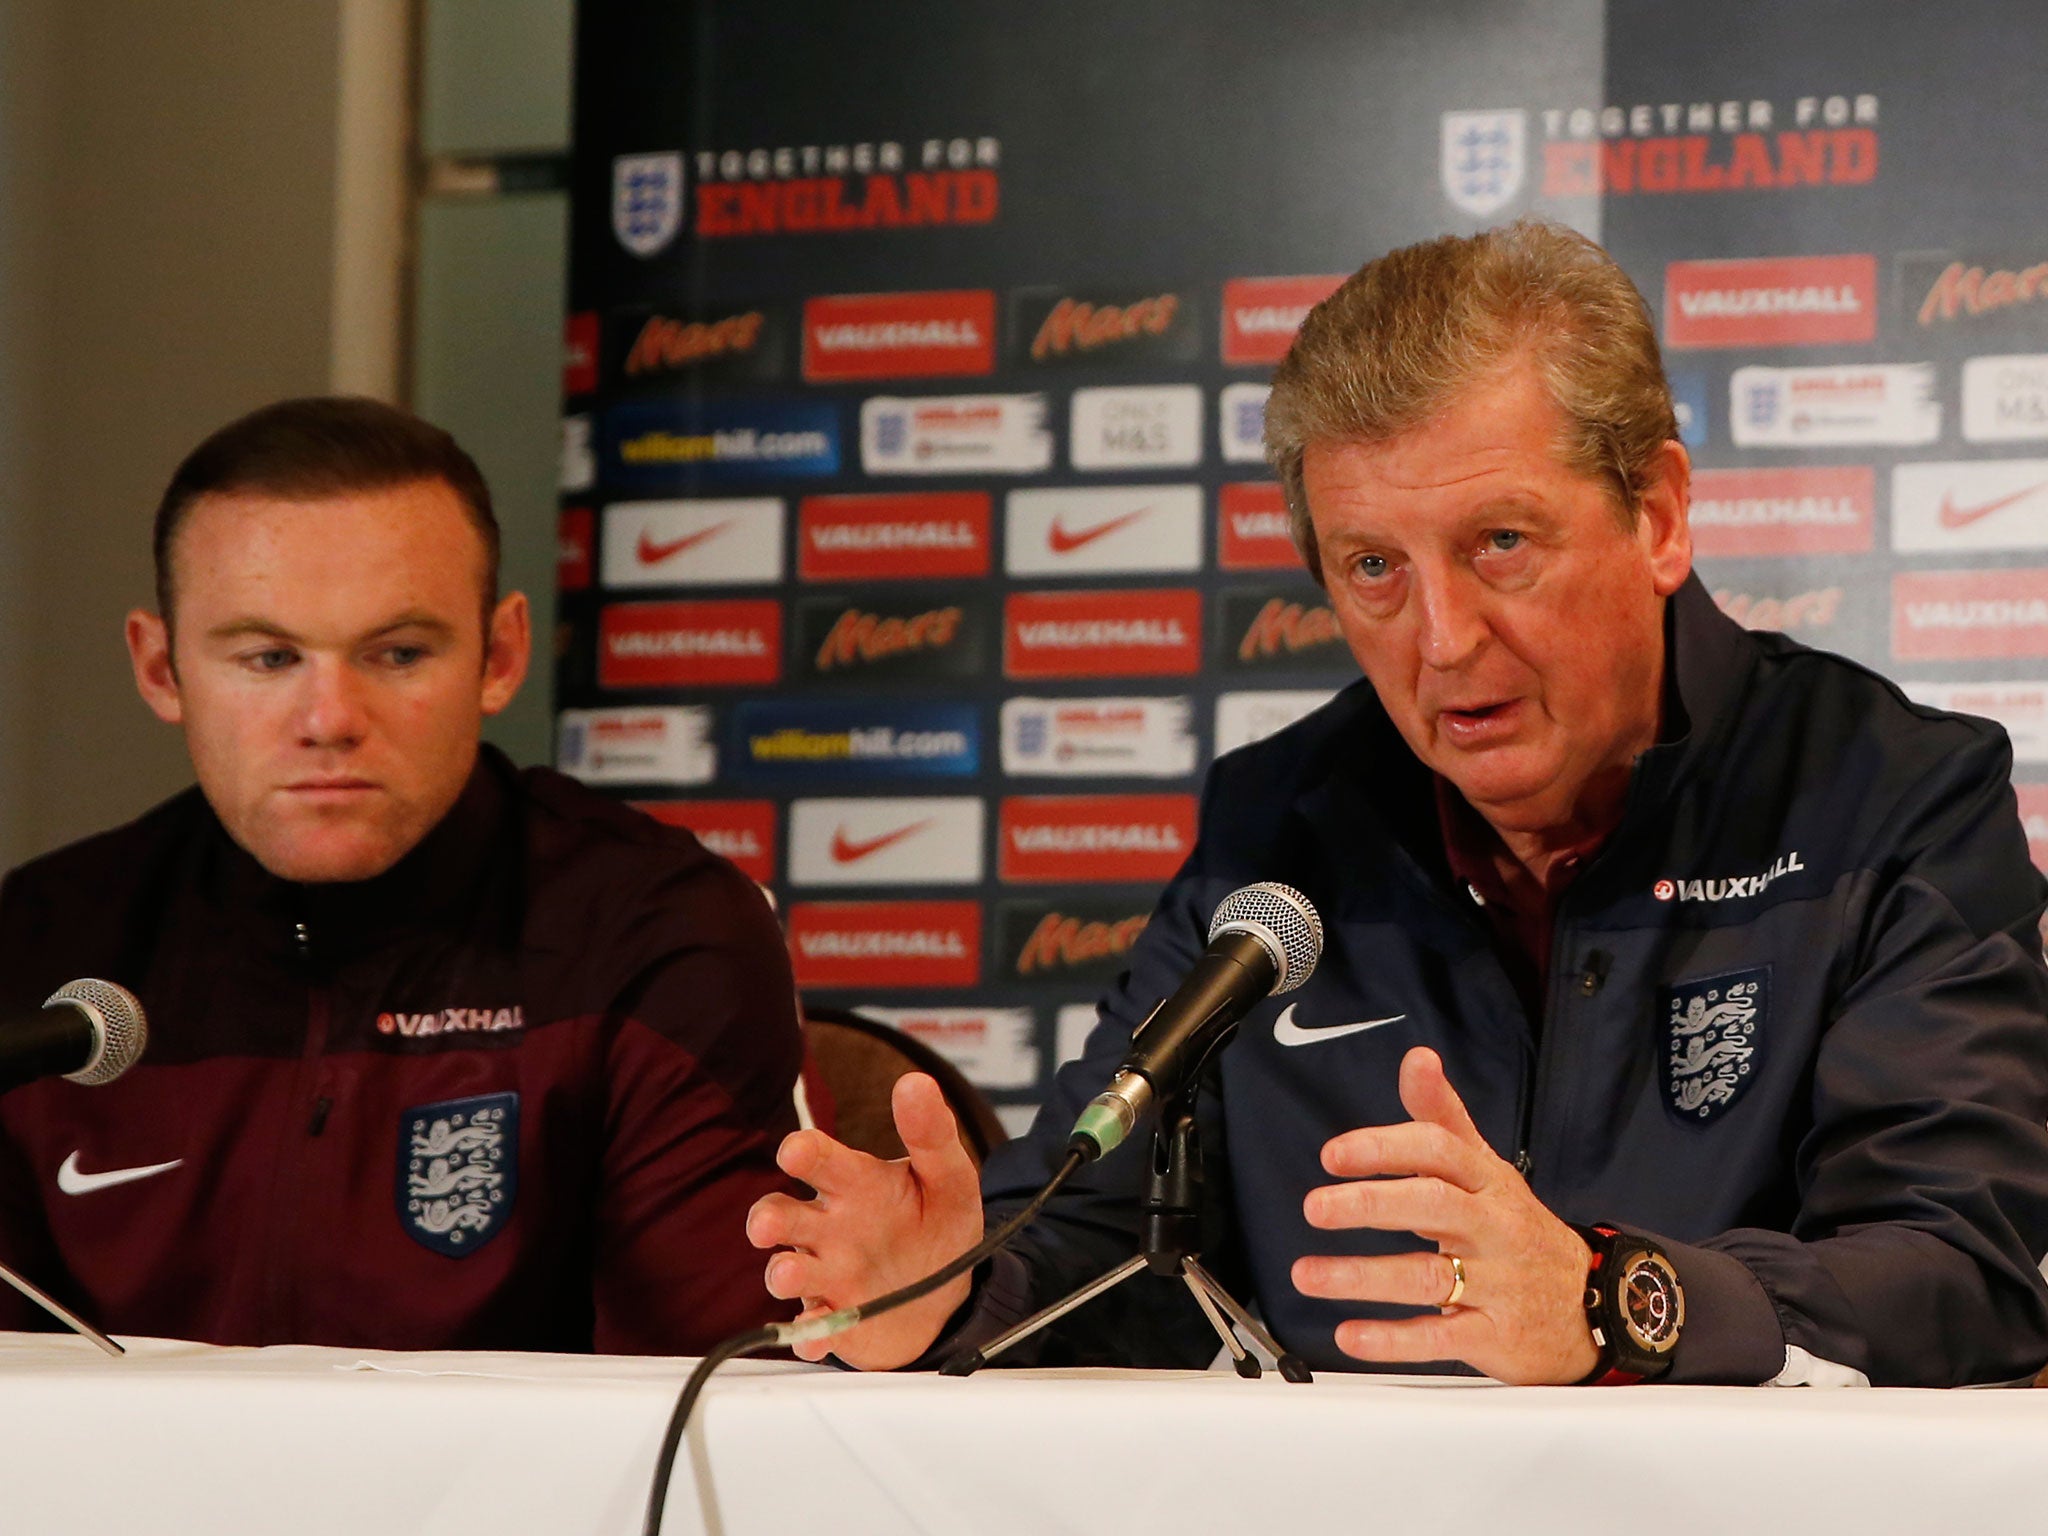 Roy Hodgson (R) and Wayne Rooney express their condolences to the victims of the Paris attacks